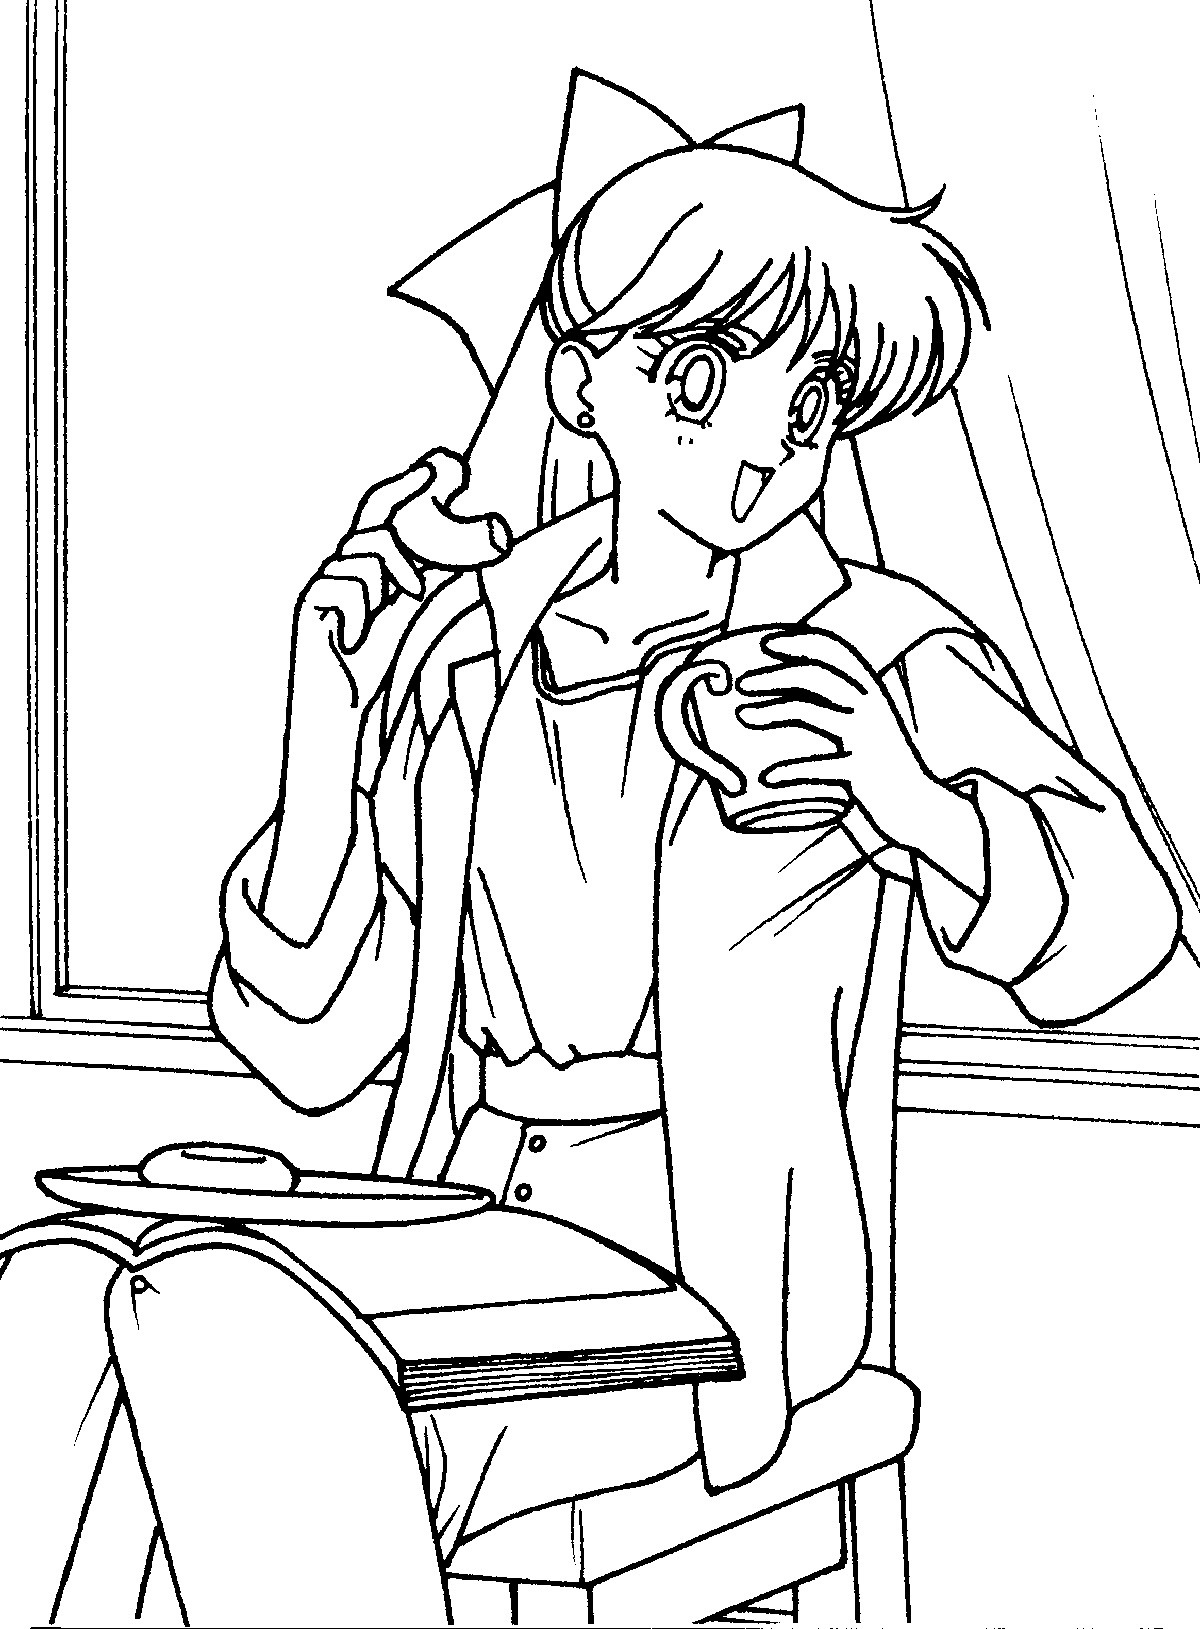 Sailor Moon #50318 (Cartoons) - Printable coloring pages